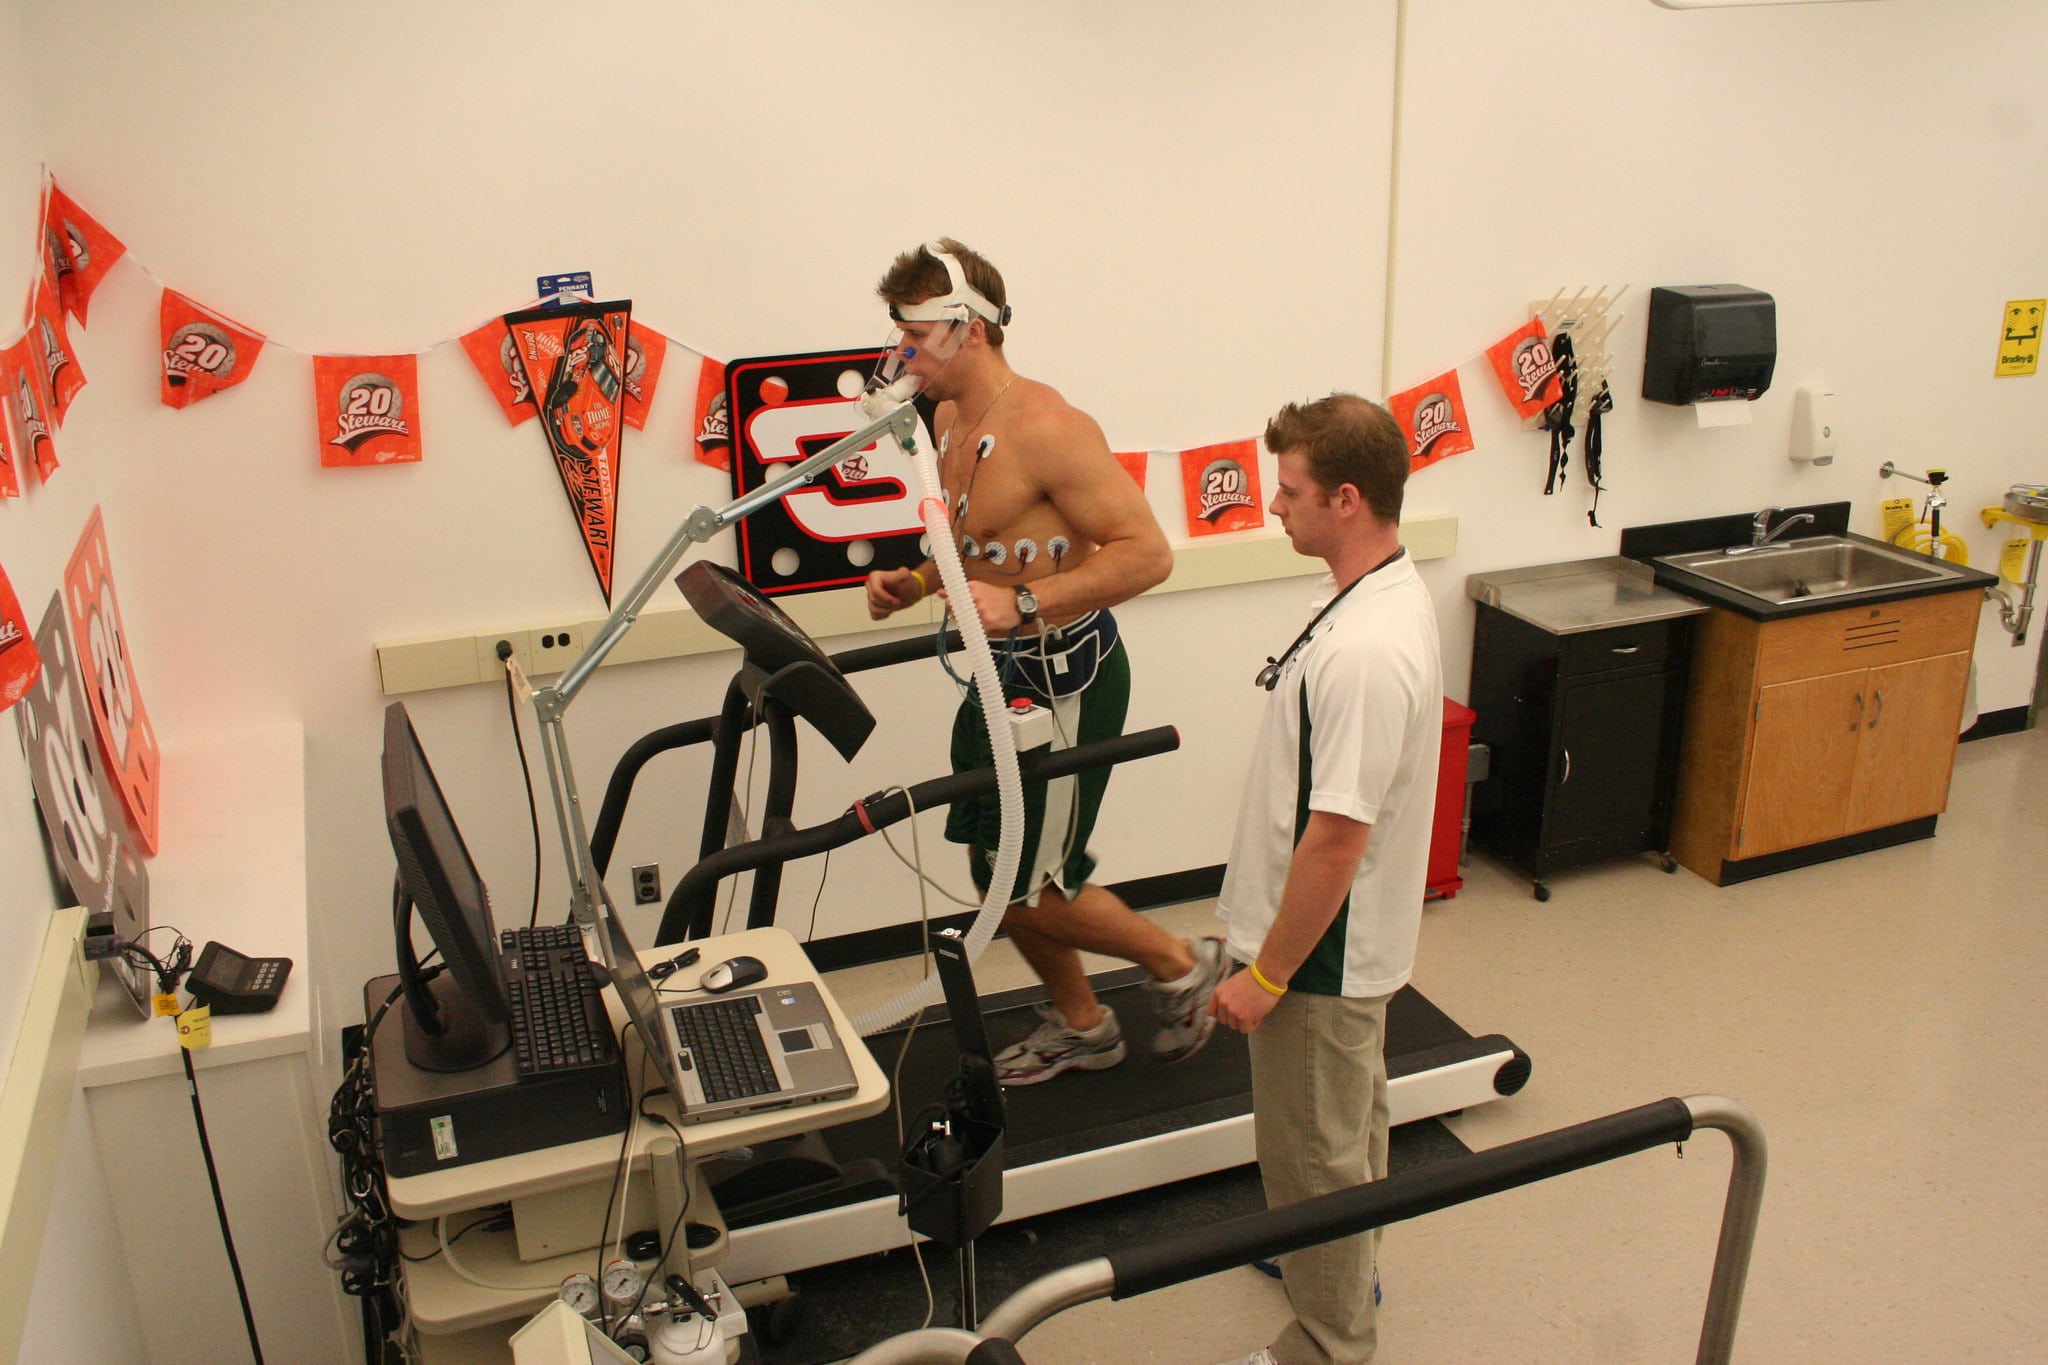 A man running on a treadmill at Vermont State University.